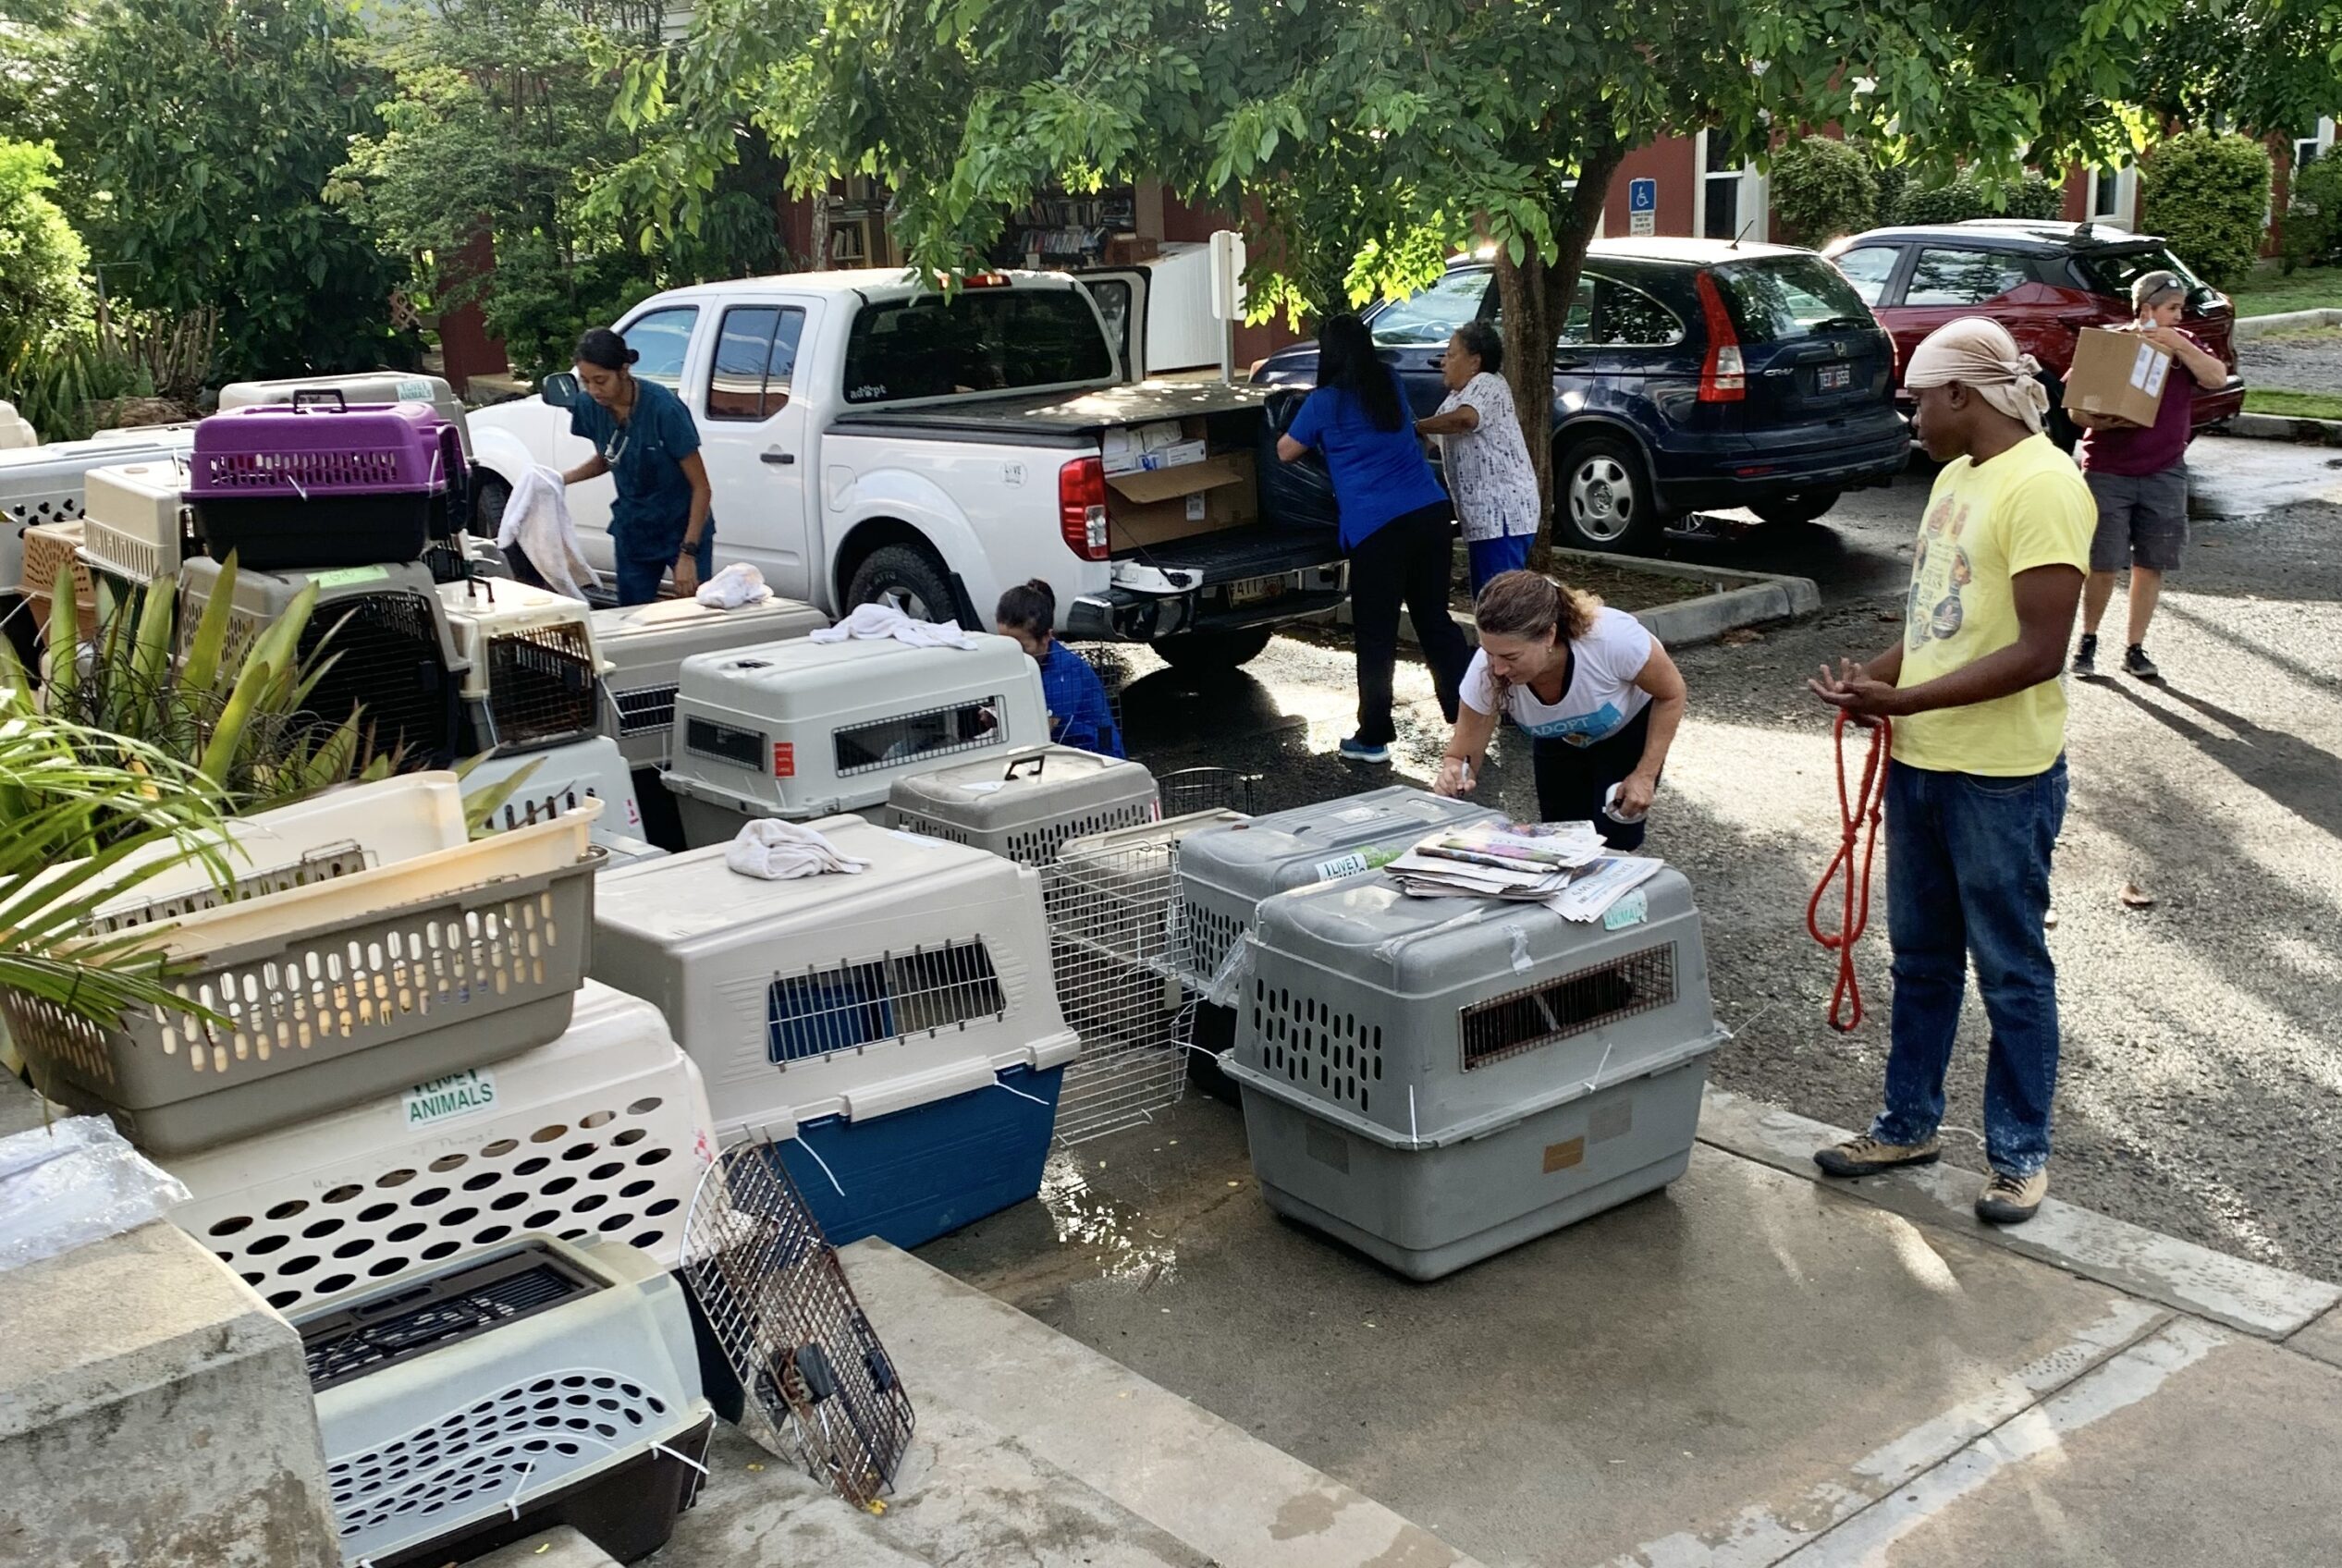 Staff and volunteers prepare for the spay/neuter event at the Humane Society of St. Thomas. (Photo courtesy of Humane Society of St. Thomas)